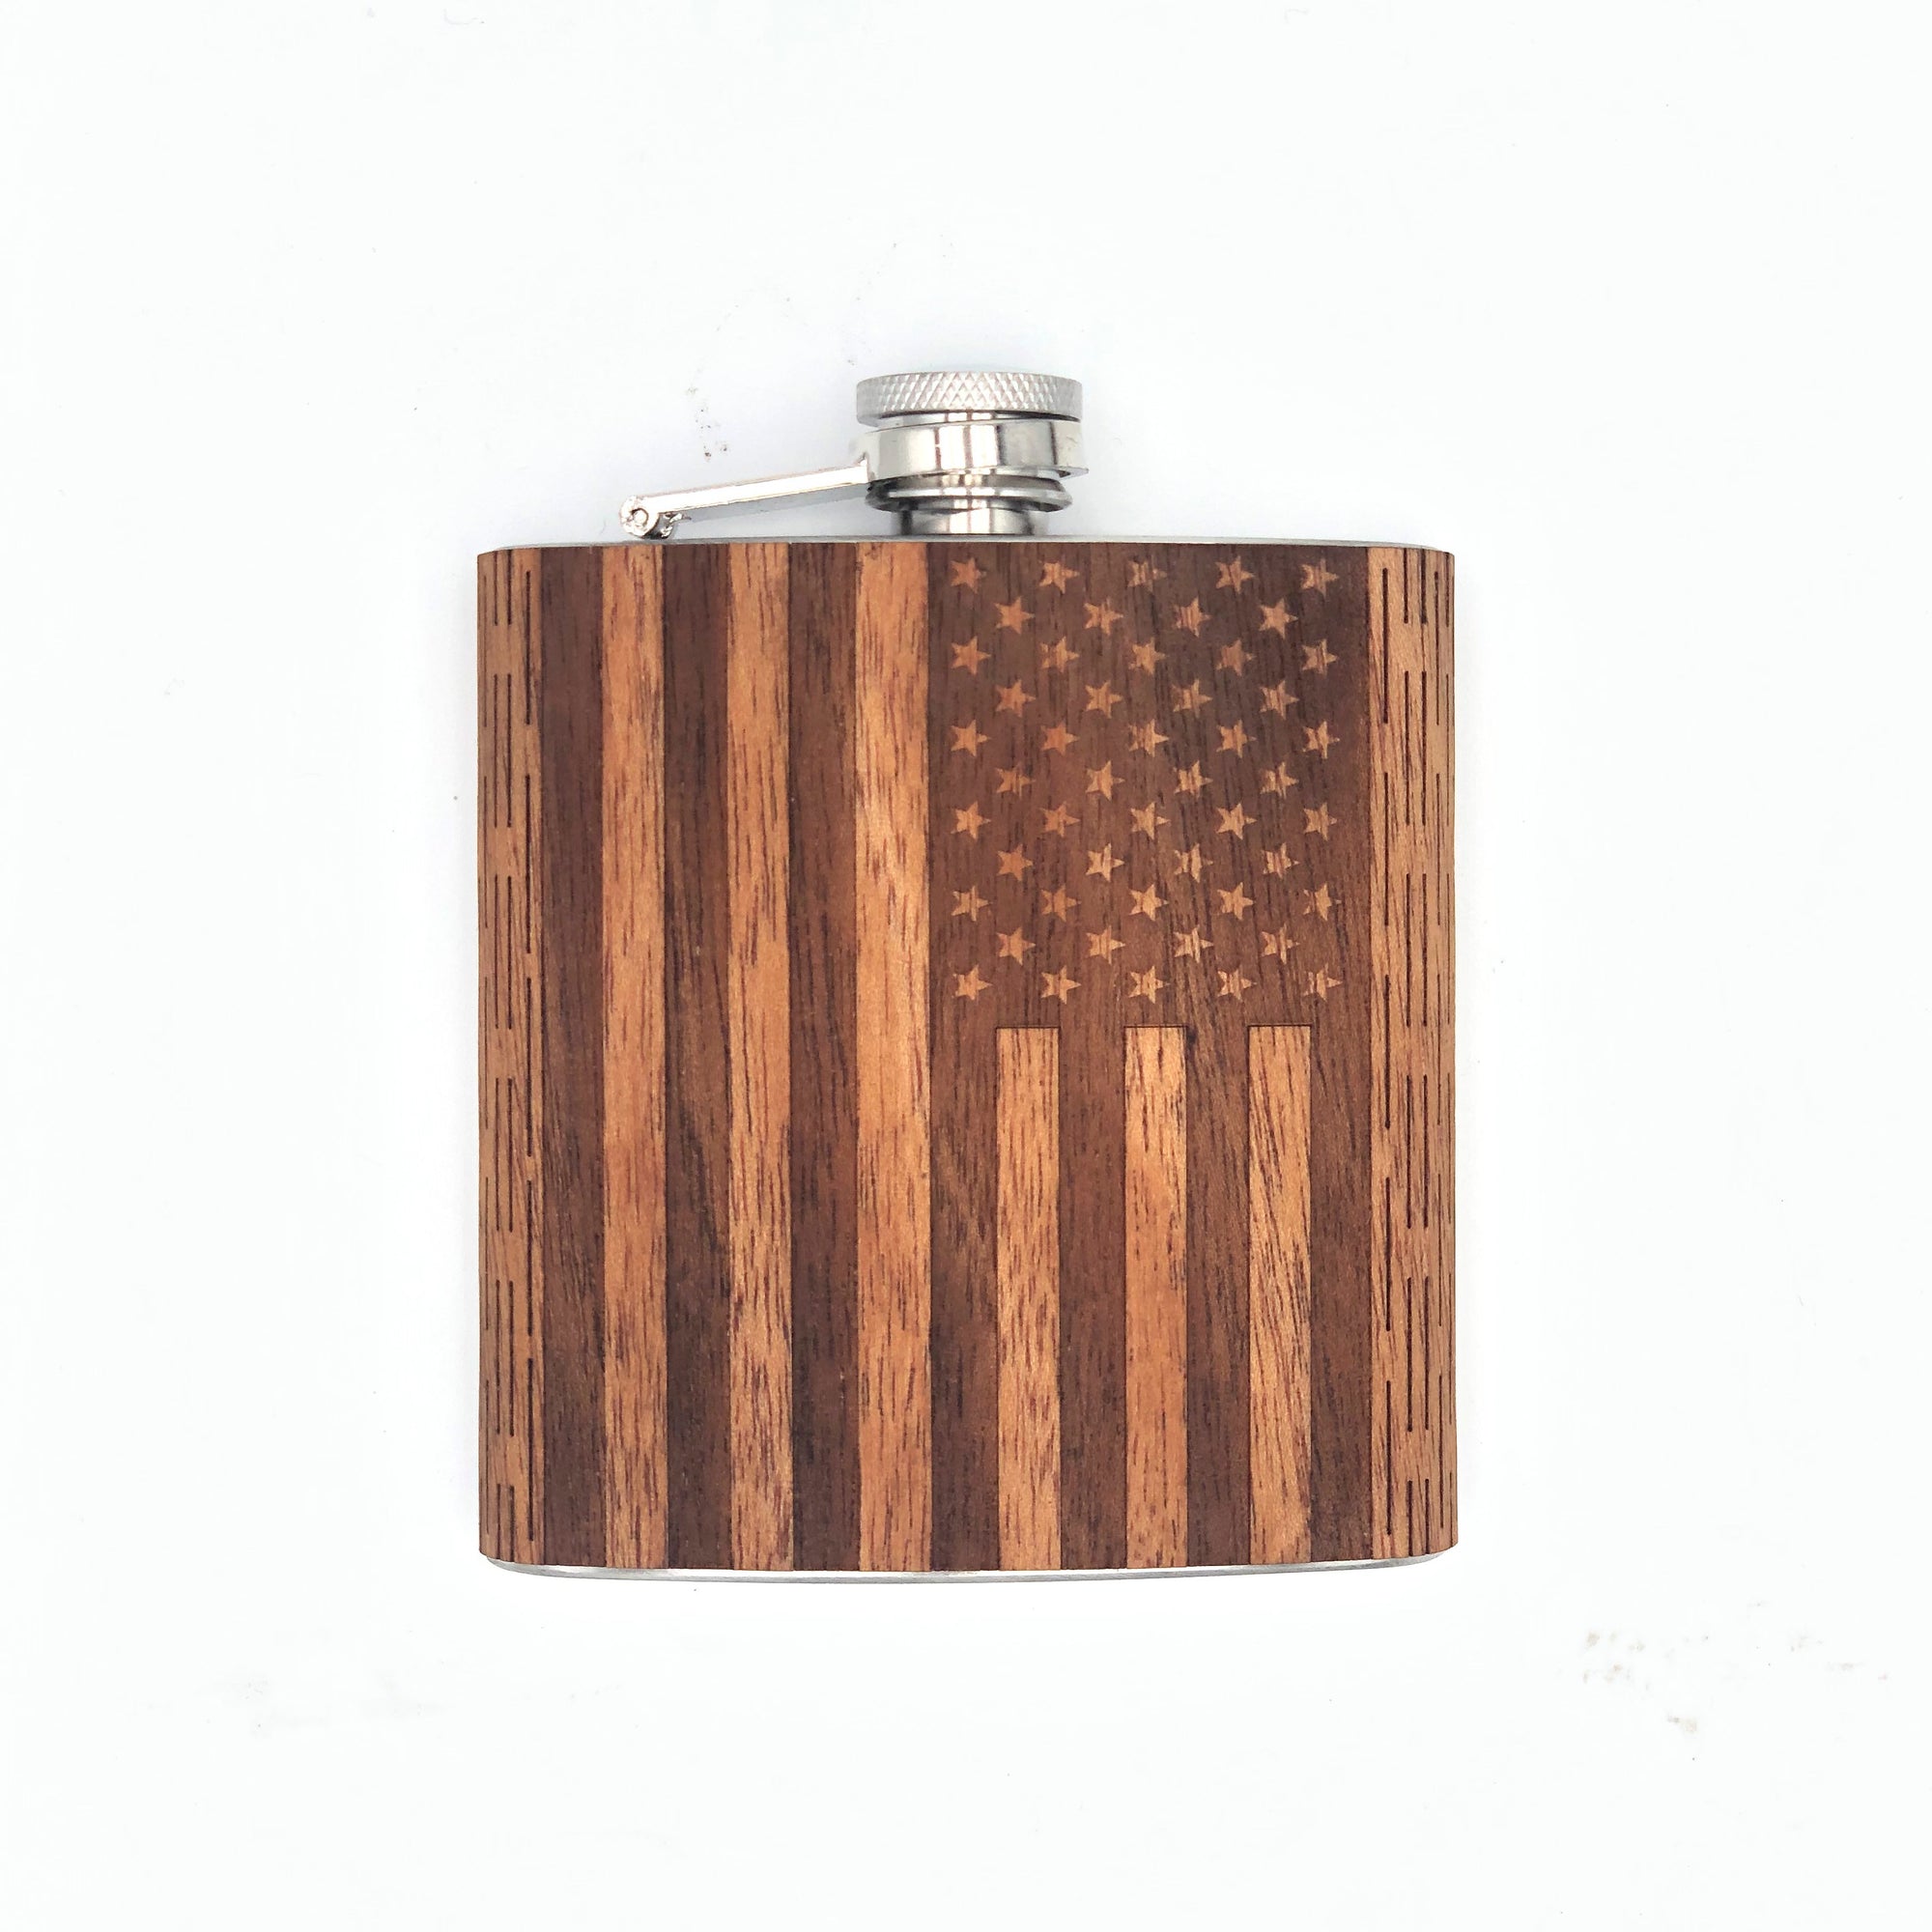 American Flag Wooden Hip Flask